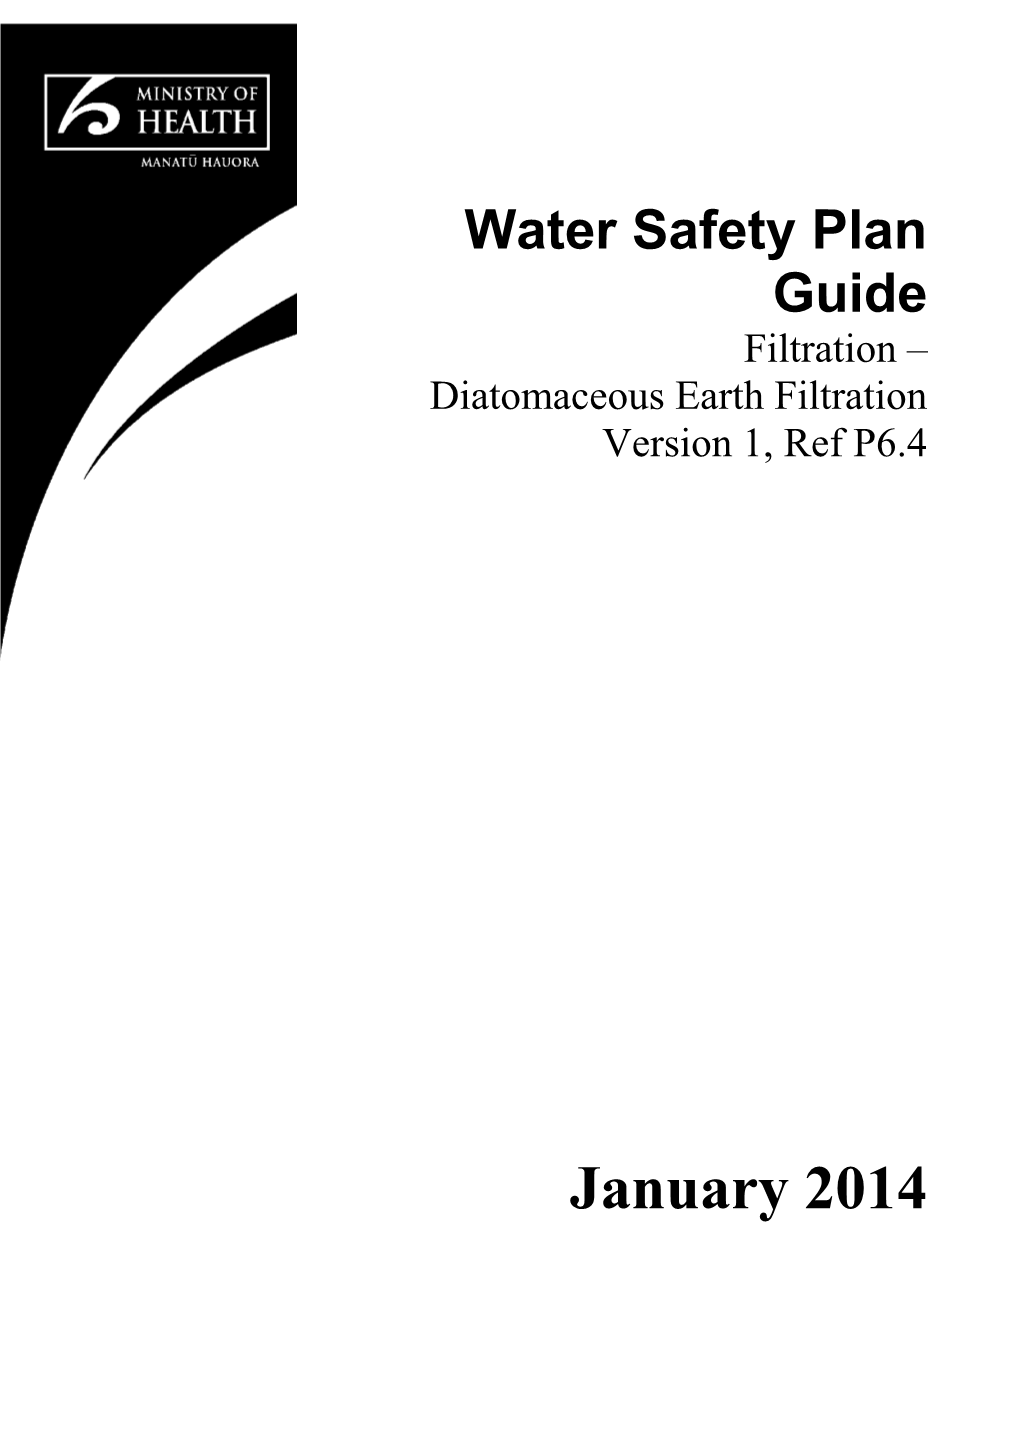 Water Safety Plan Guide: Filtration Diatomaceous Earth Filtration